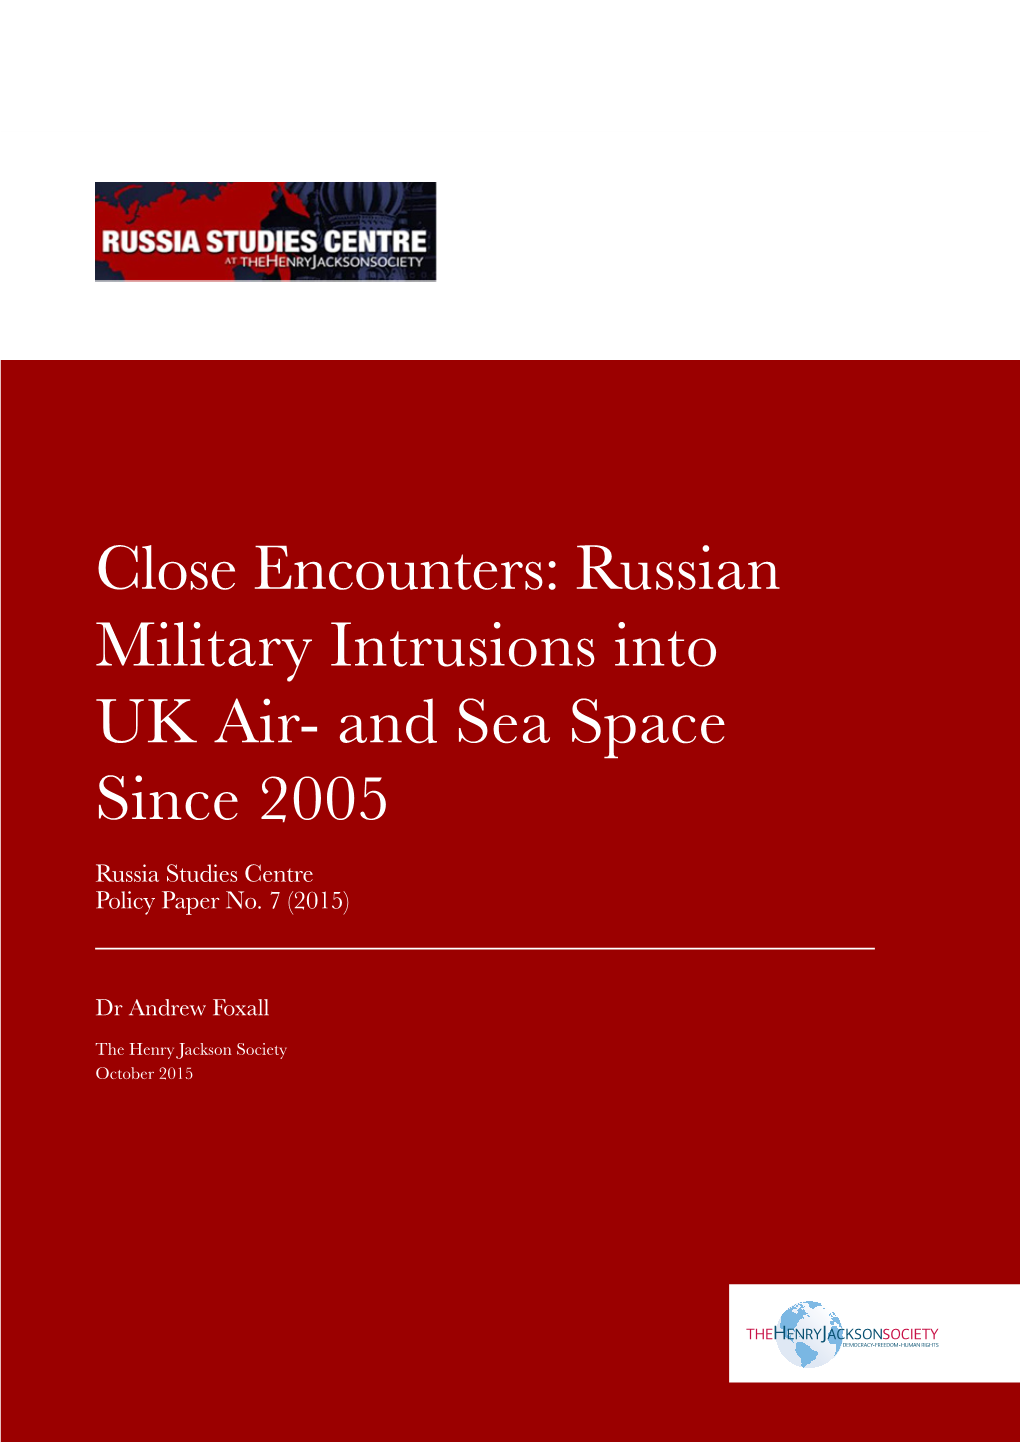 Russian Military Intrusions Into UK Air- and Sea Space Since 2005 Russia Studies Centre Policy Paper No